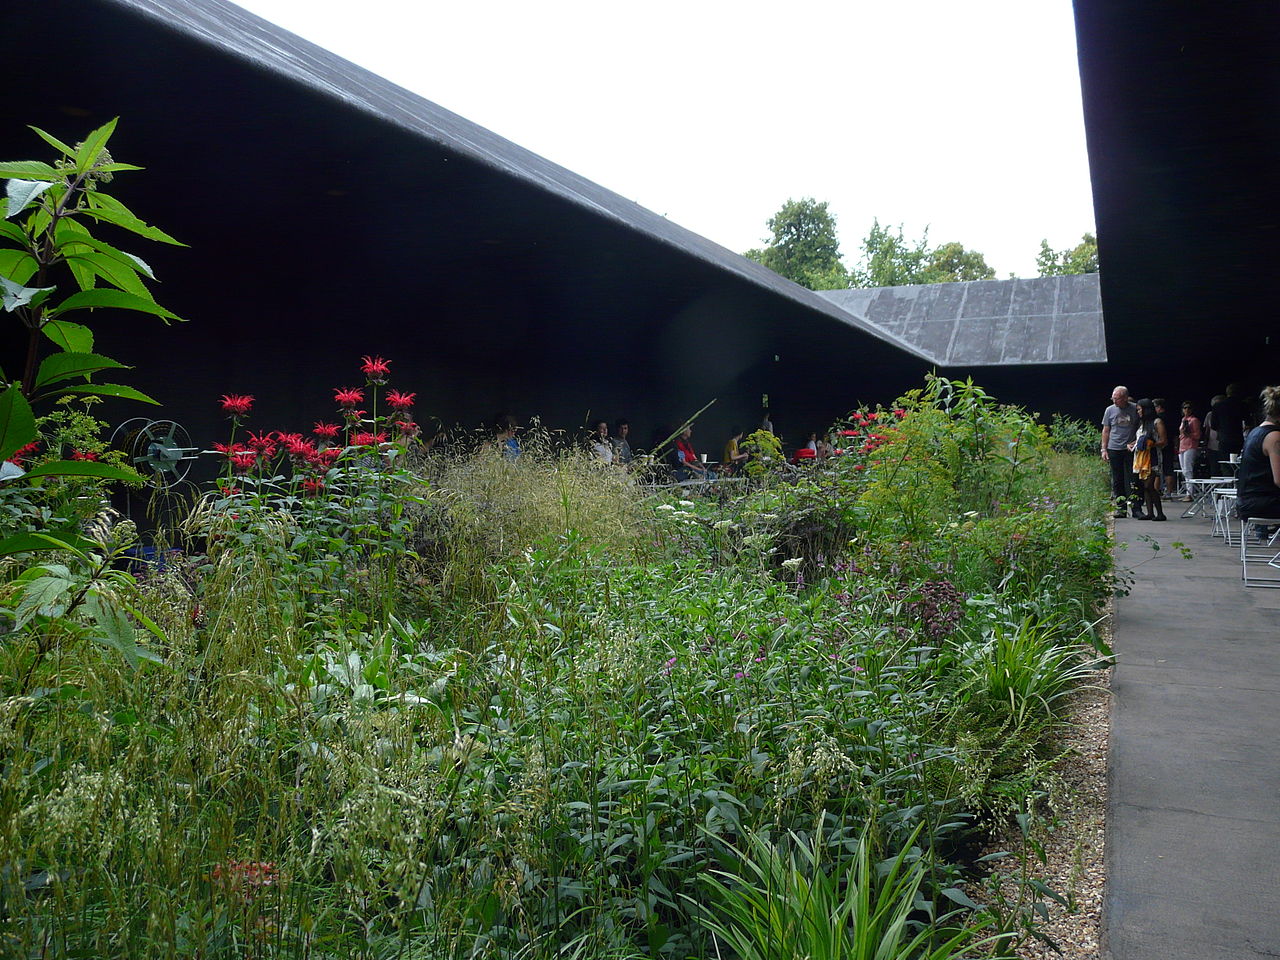 15 Works of Peter Zumthor Every Architect should visit - Serpentine Gallery Pavilion (Temporary)